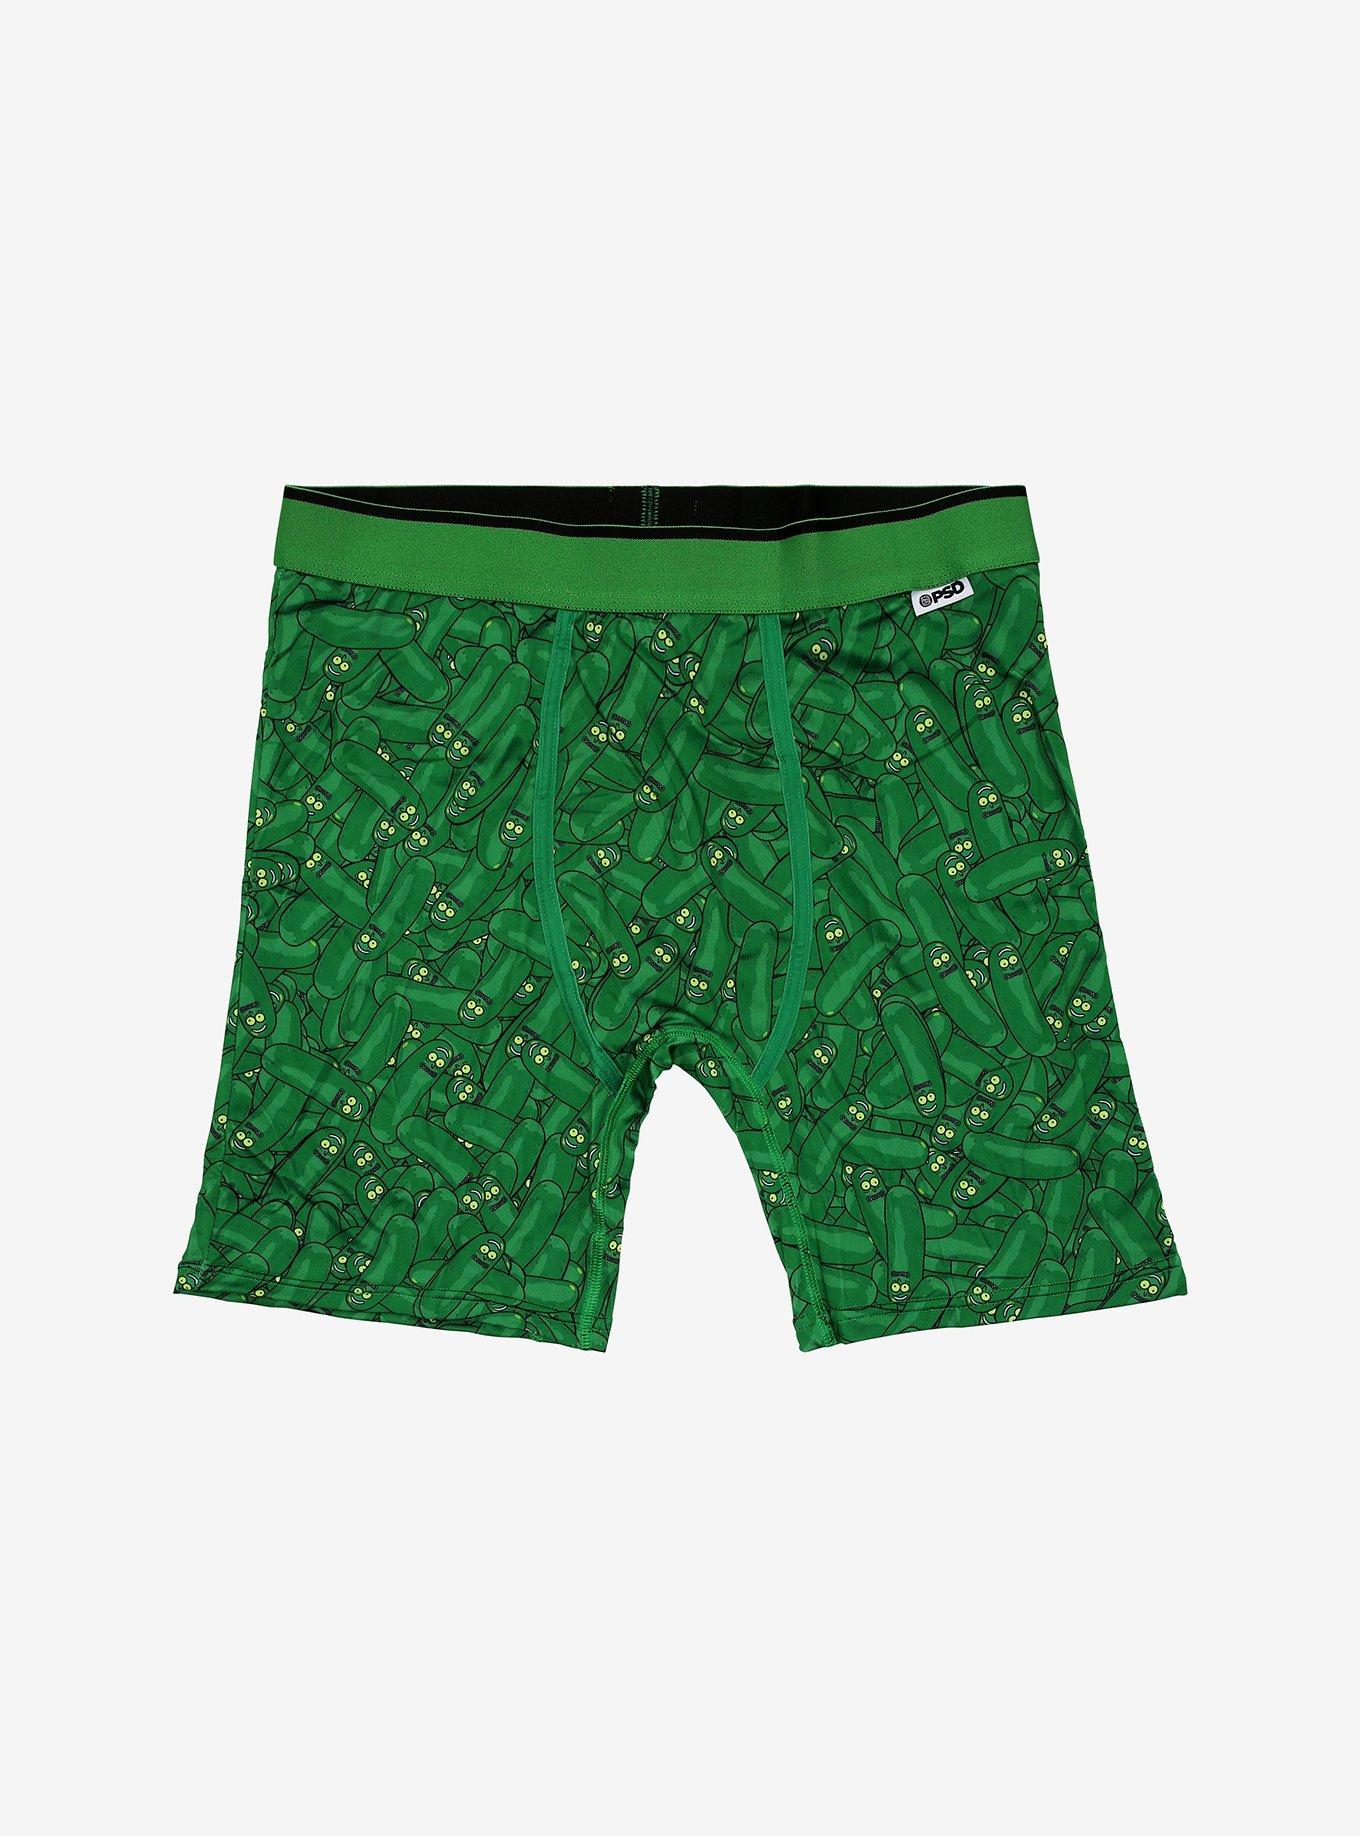 Rick and Morty King S**t PSD Boxer Briefs